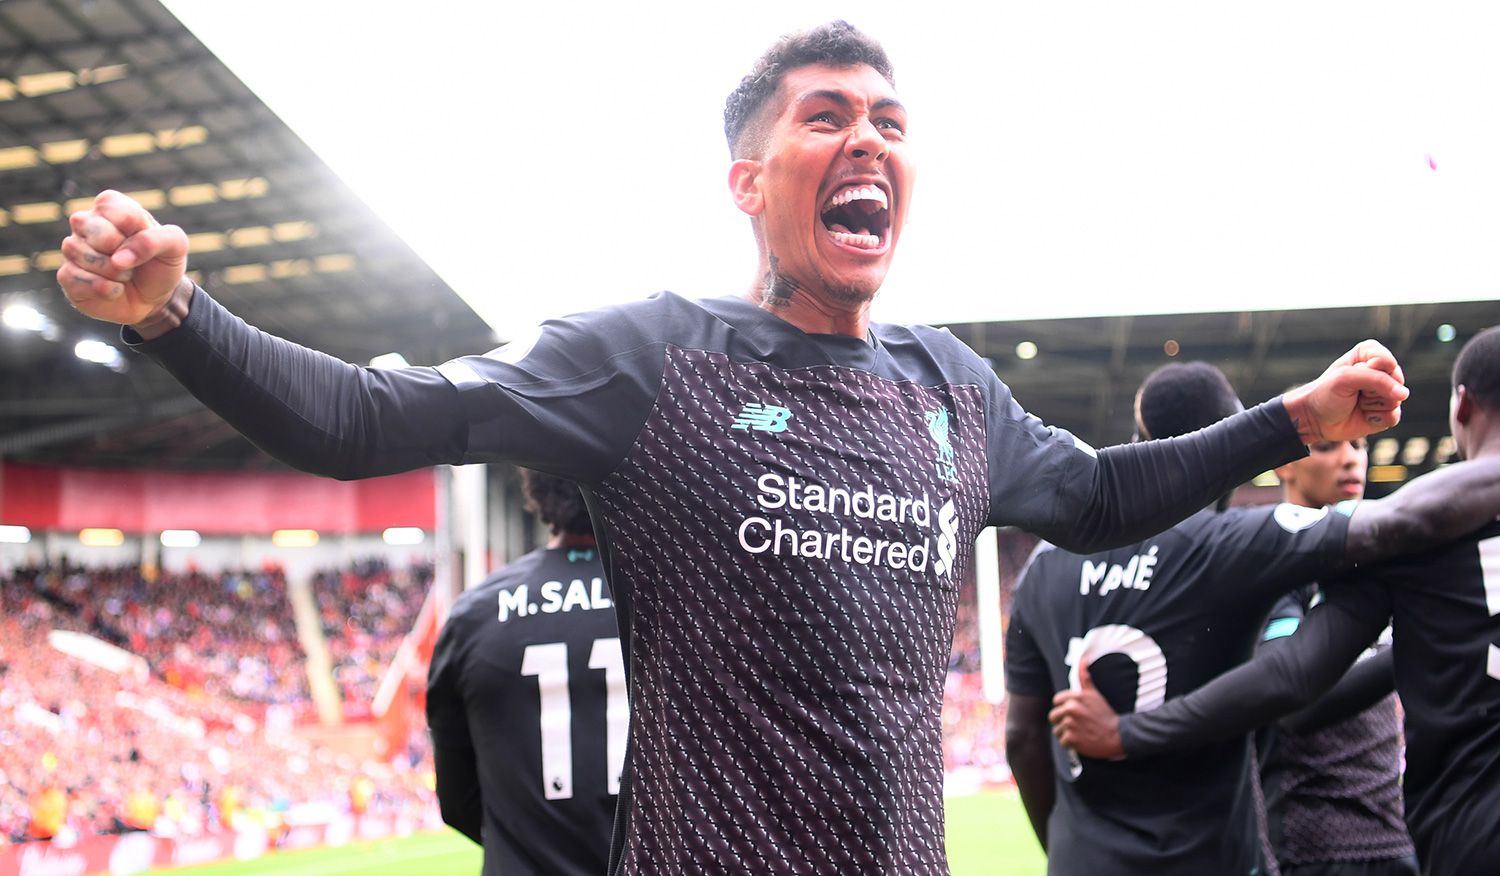 Roberto Firmino celebrates a goal with the Liverpool